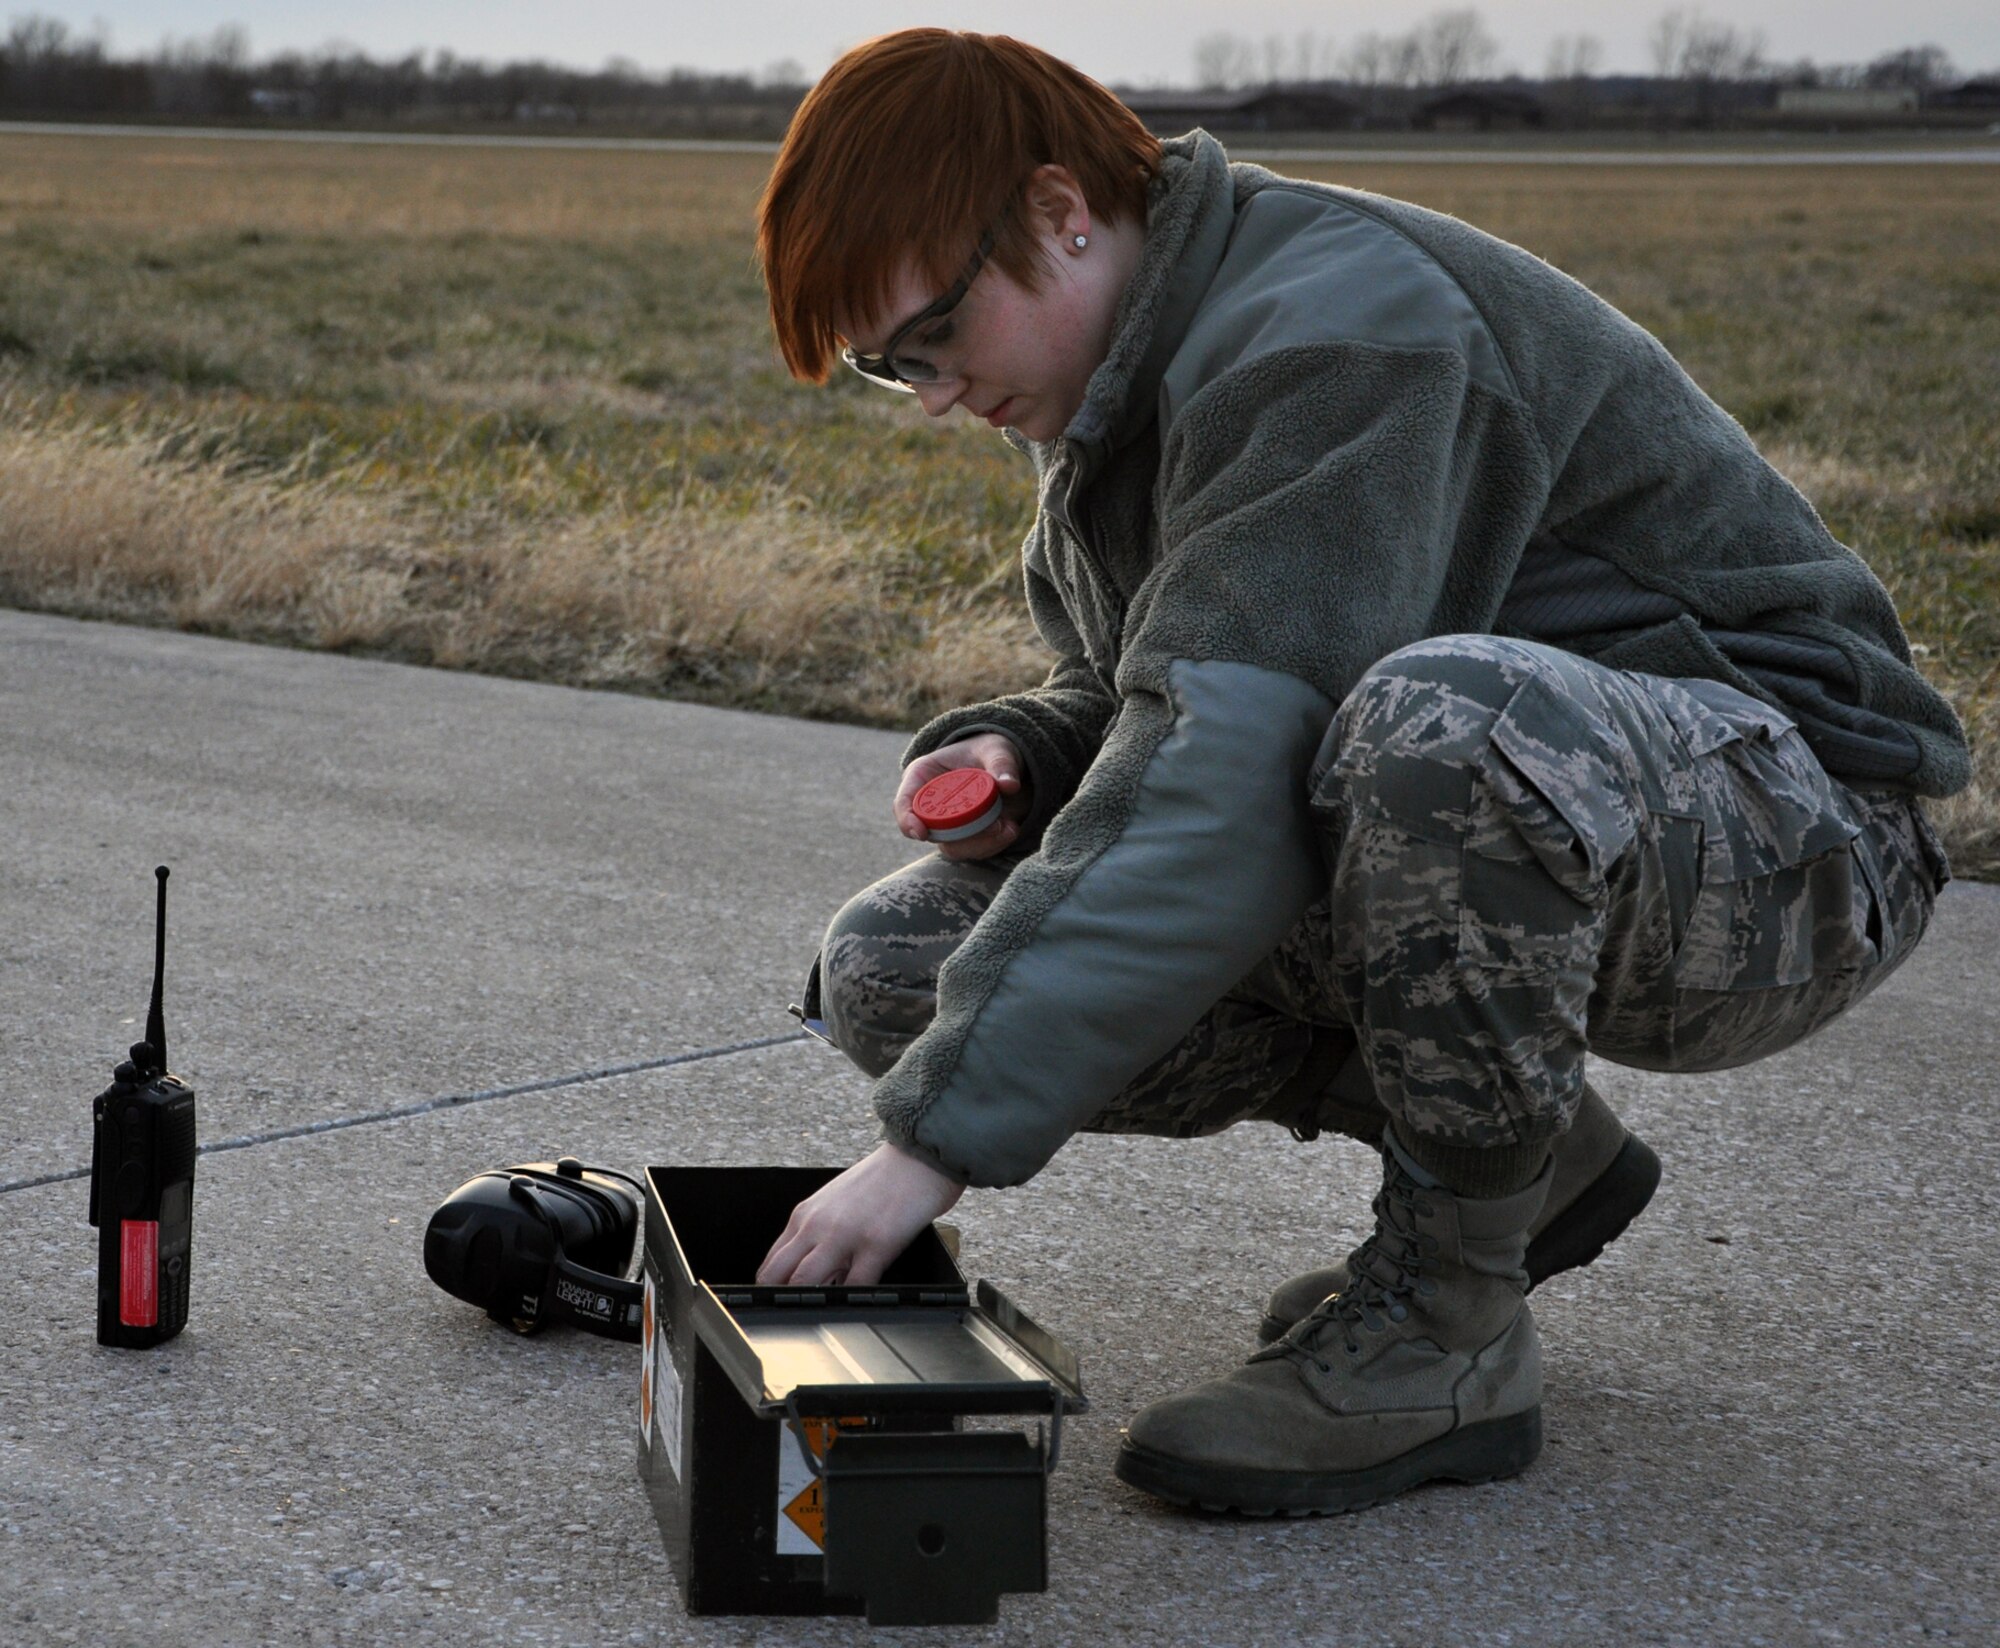 WHITEMAN AIR FORCE BASE, Mo. – Airman 1st Class Hannah Schmitz, 509th Operations Support Squadron airfield management coordinator, prepares pyrotechnics while responding to a bird threat, Jan. 9. Pyrotechnics and other resources help keep birds away from the paths of departing, landing and flying aircraft. (U.S. Air Force photo/Senior Airman Wesley Wright)